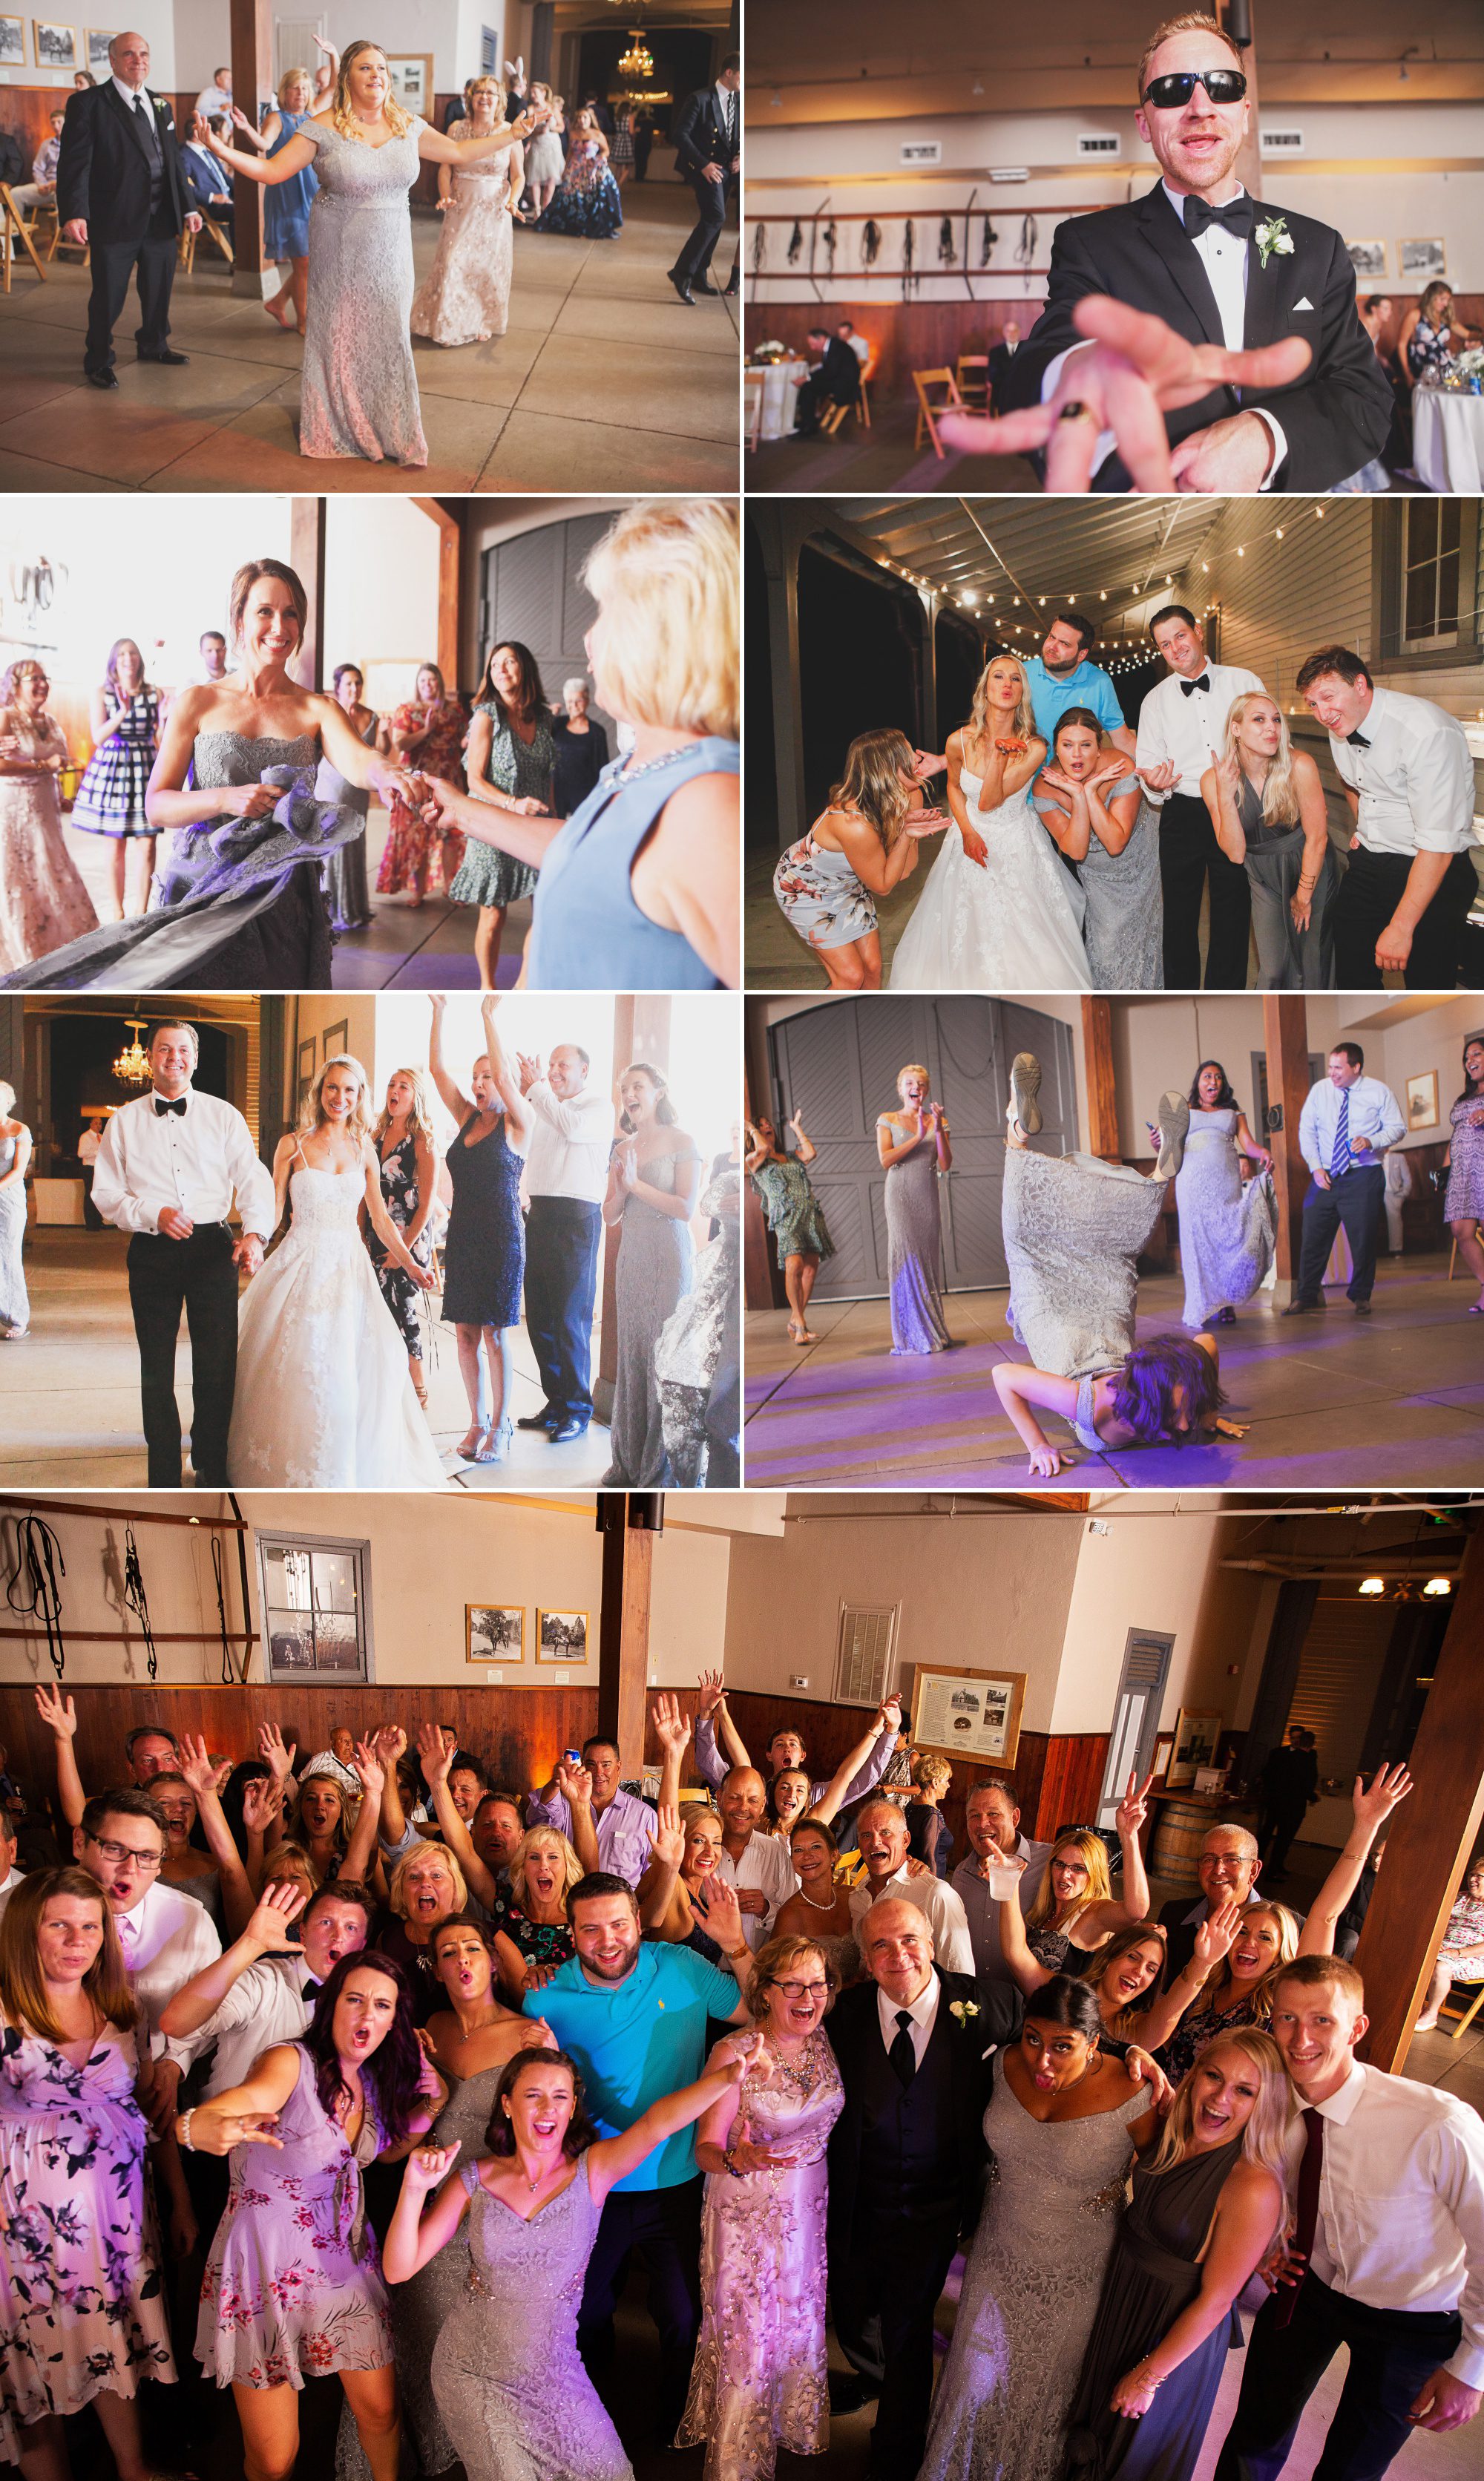 Fun dancing and dance moves at wedding reception Belle Meade Plantation in Nashville, TN. Photos by Krista Lee Photography 